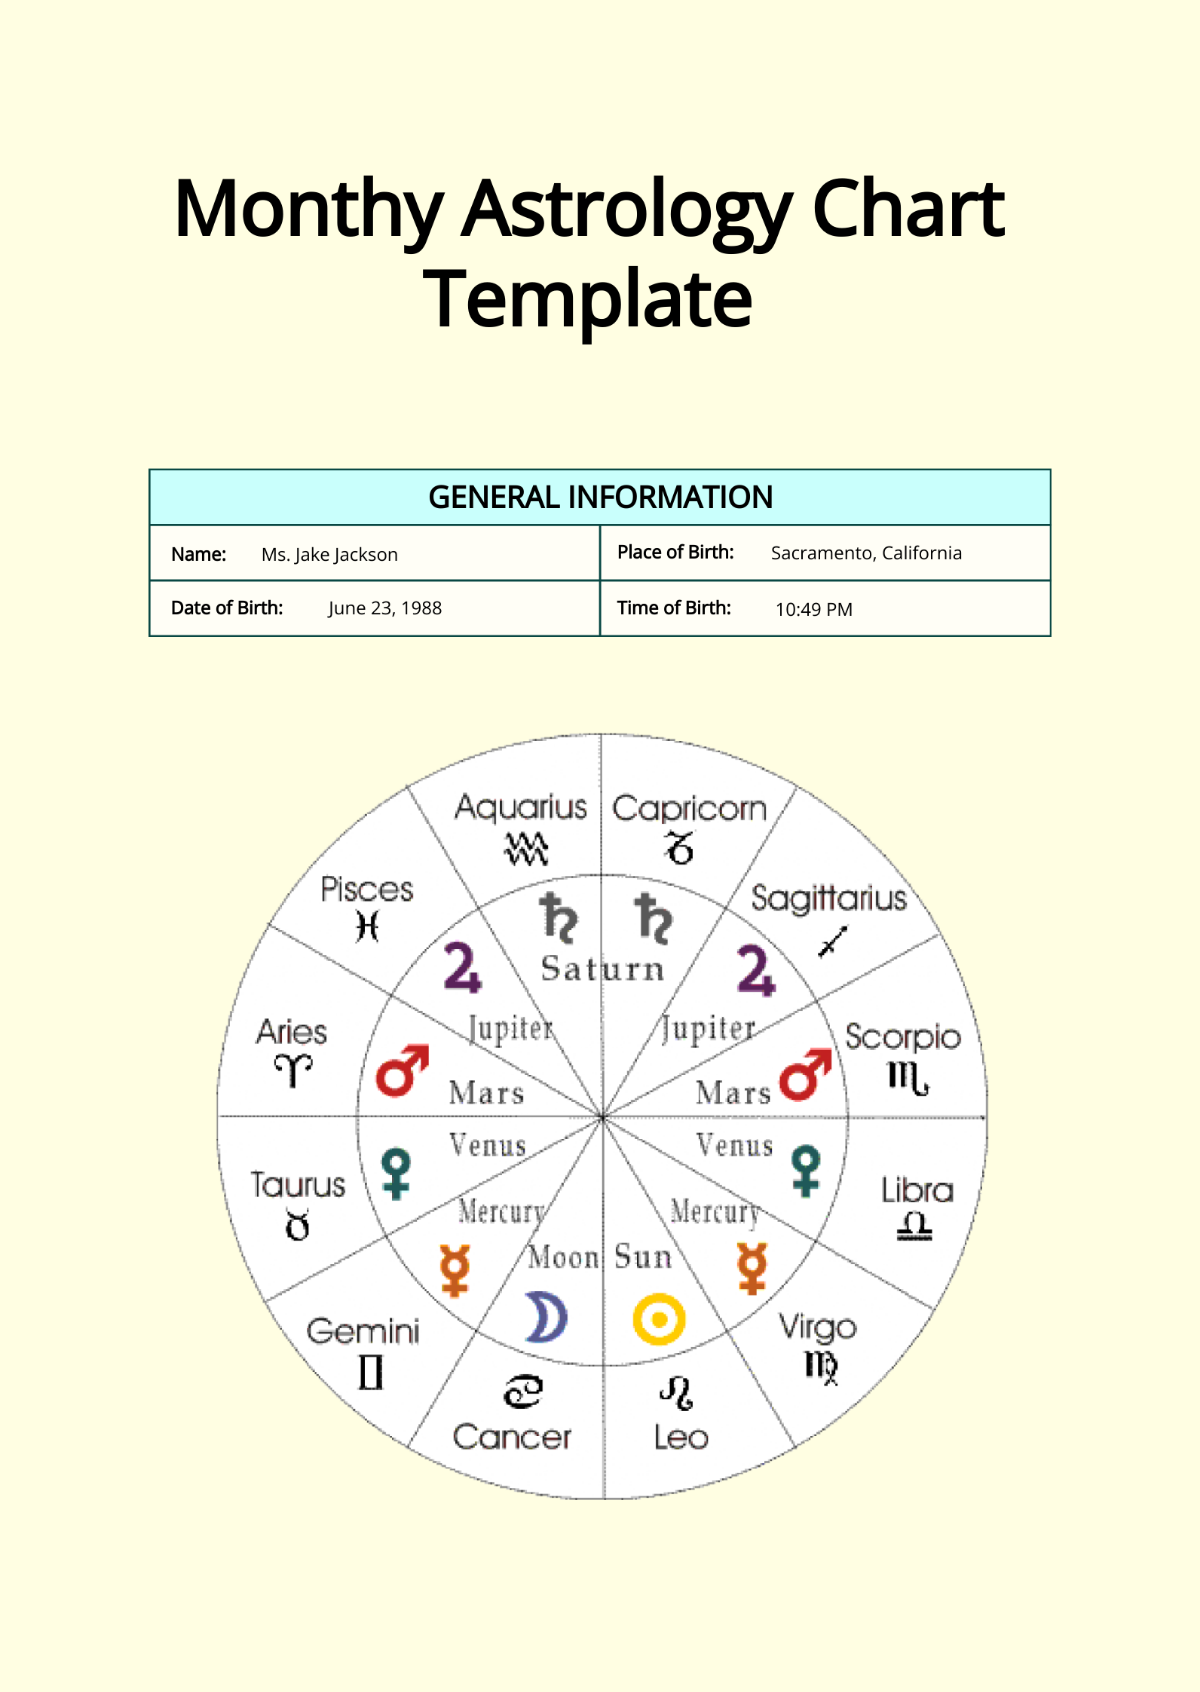 Monthy Astrology Chart